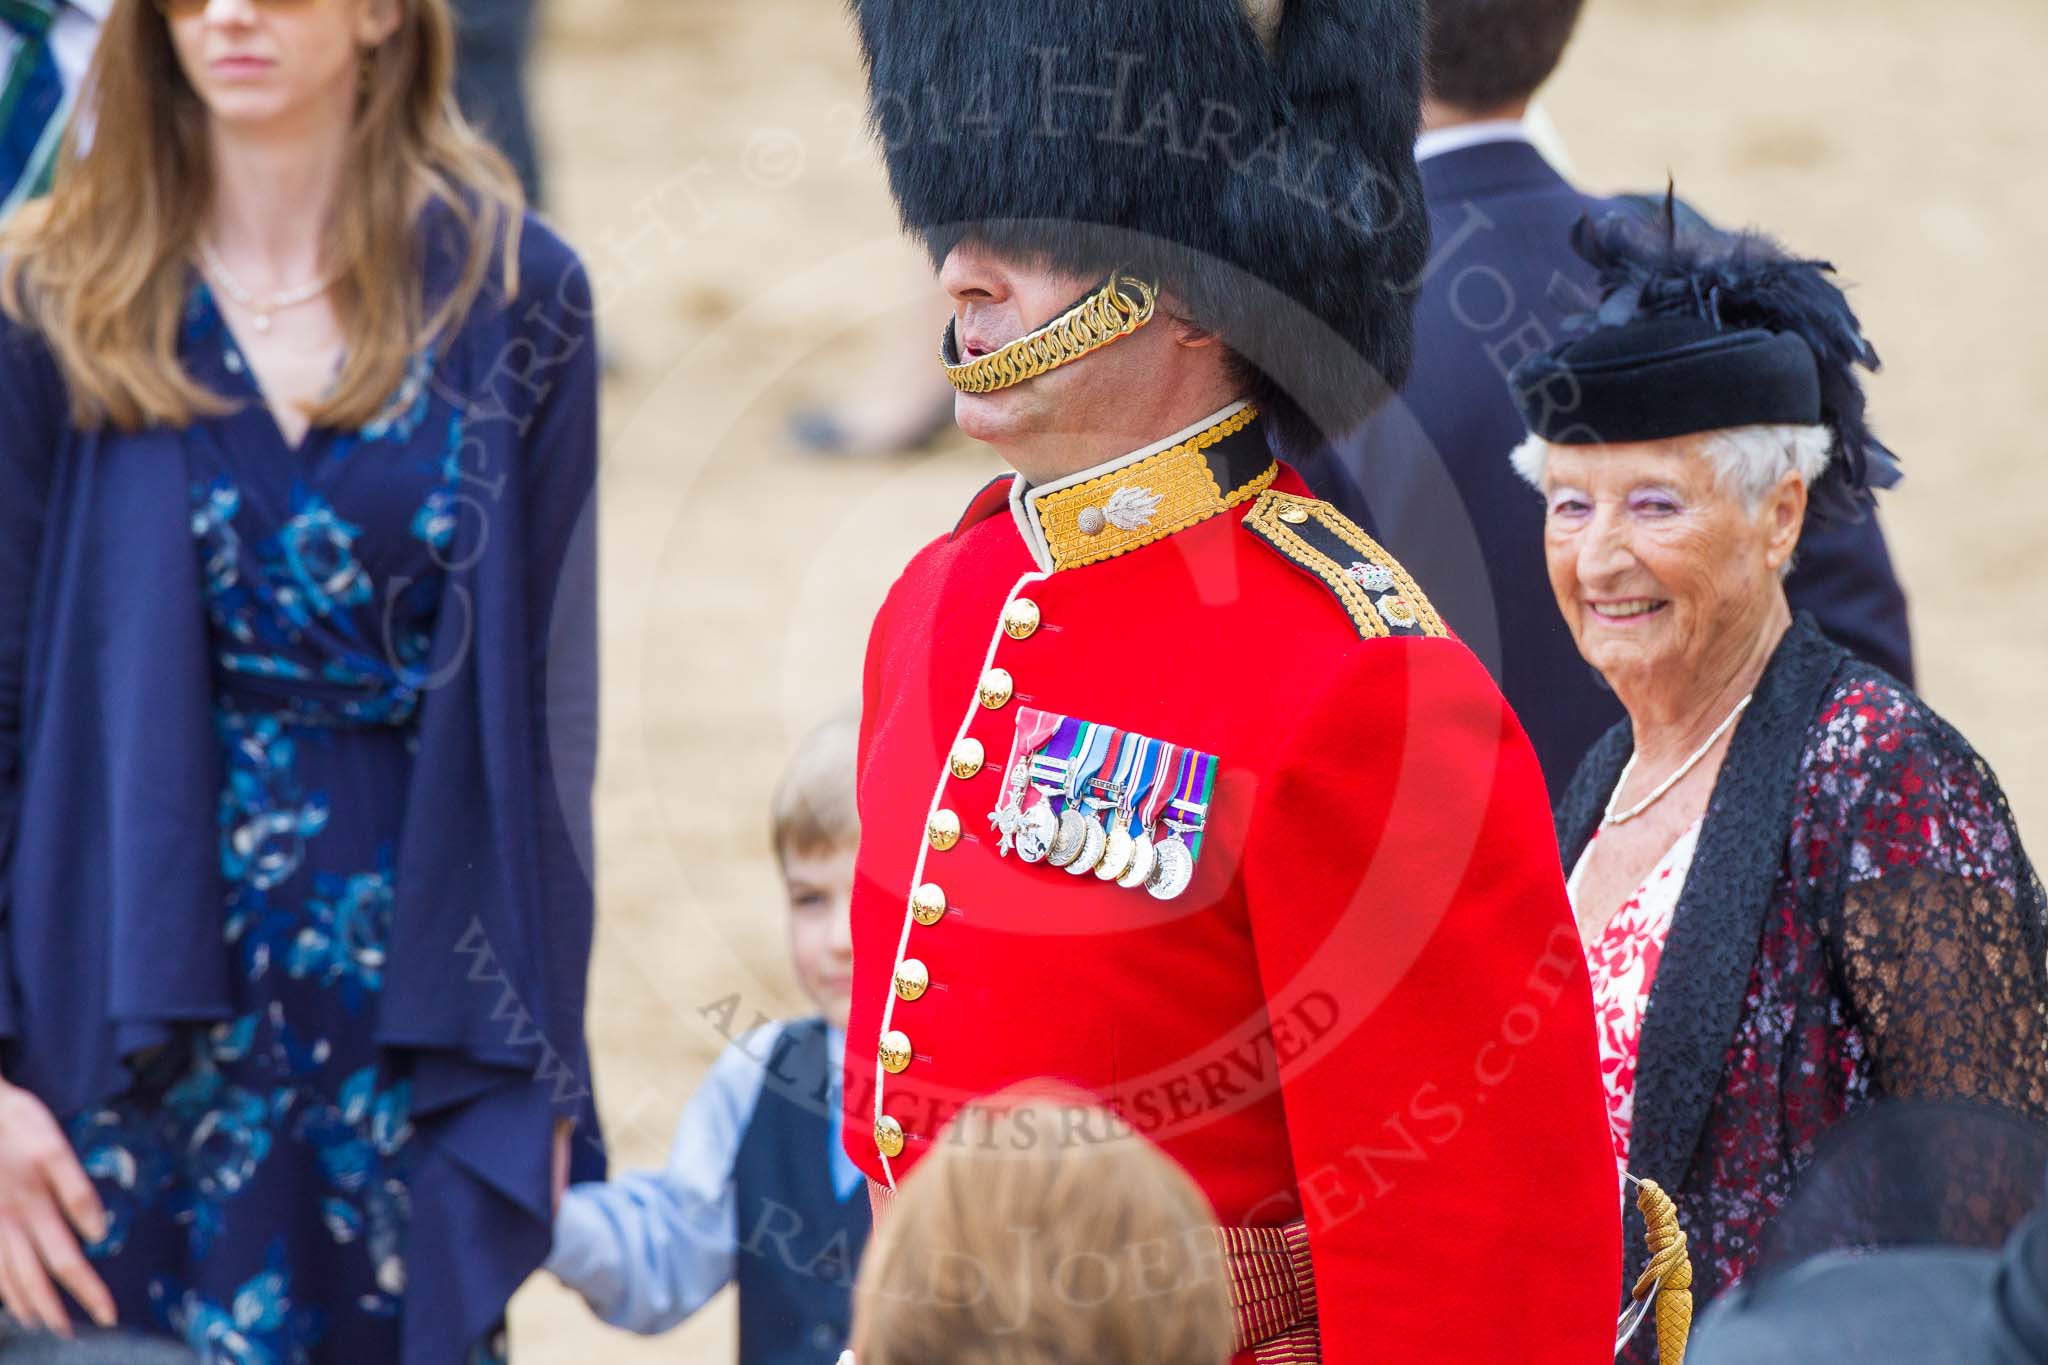 Trooping the Colour 2014.
Horse Guards Parade, Westminster,
London SW1A,

United Kingdom,
on 14 June 2014 at 12:28, image #957